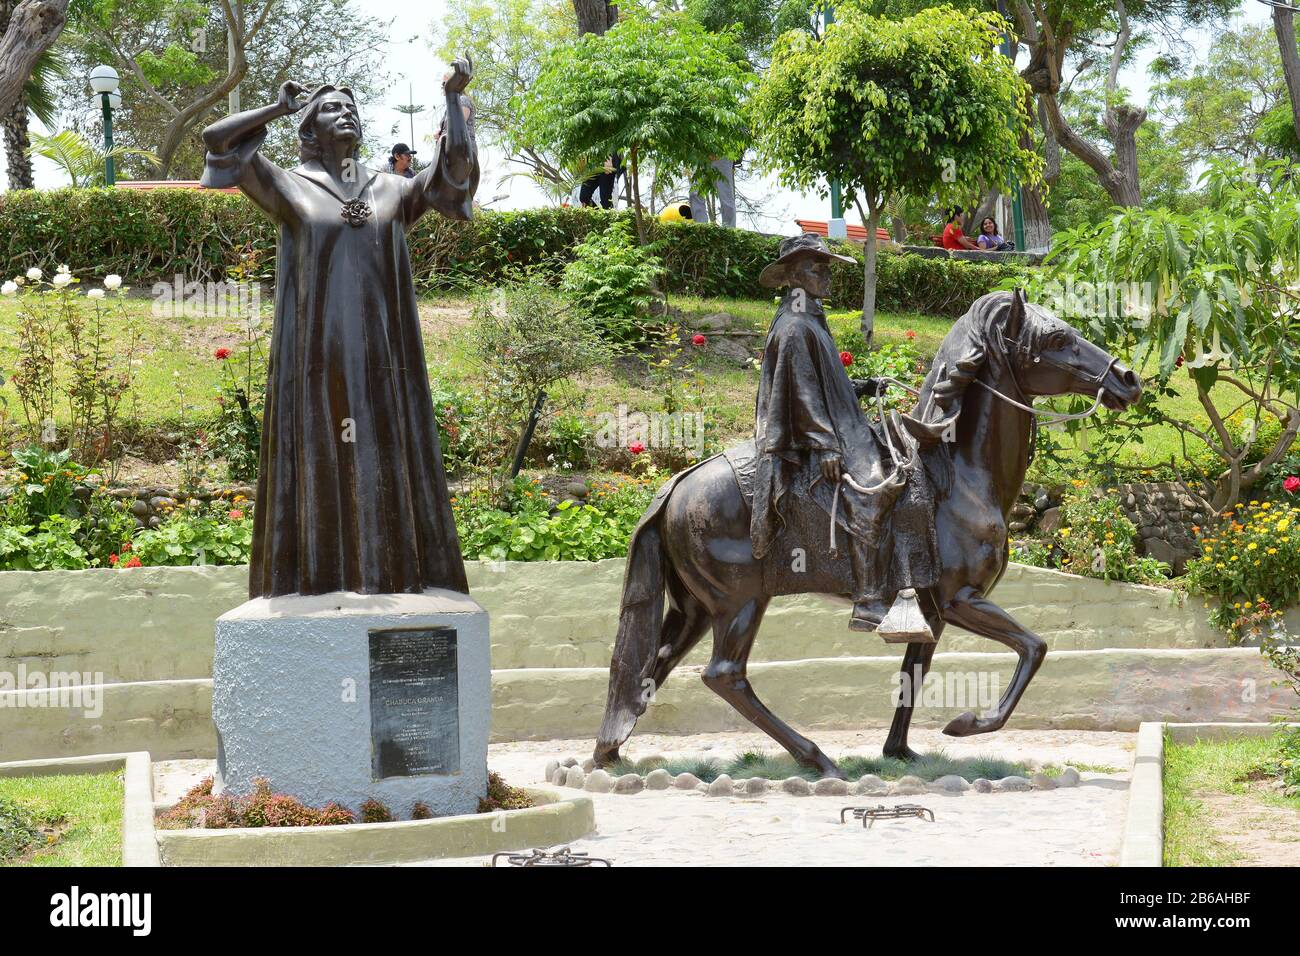 BARRANCO, PERU - OCTOBER 18, 2015: Chabuca Granda Statue. The memorial to the native singer and composer is in the Barranco District of Lima. Stock Photo